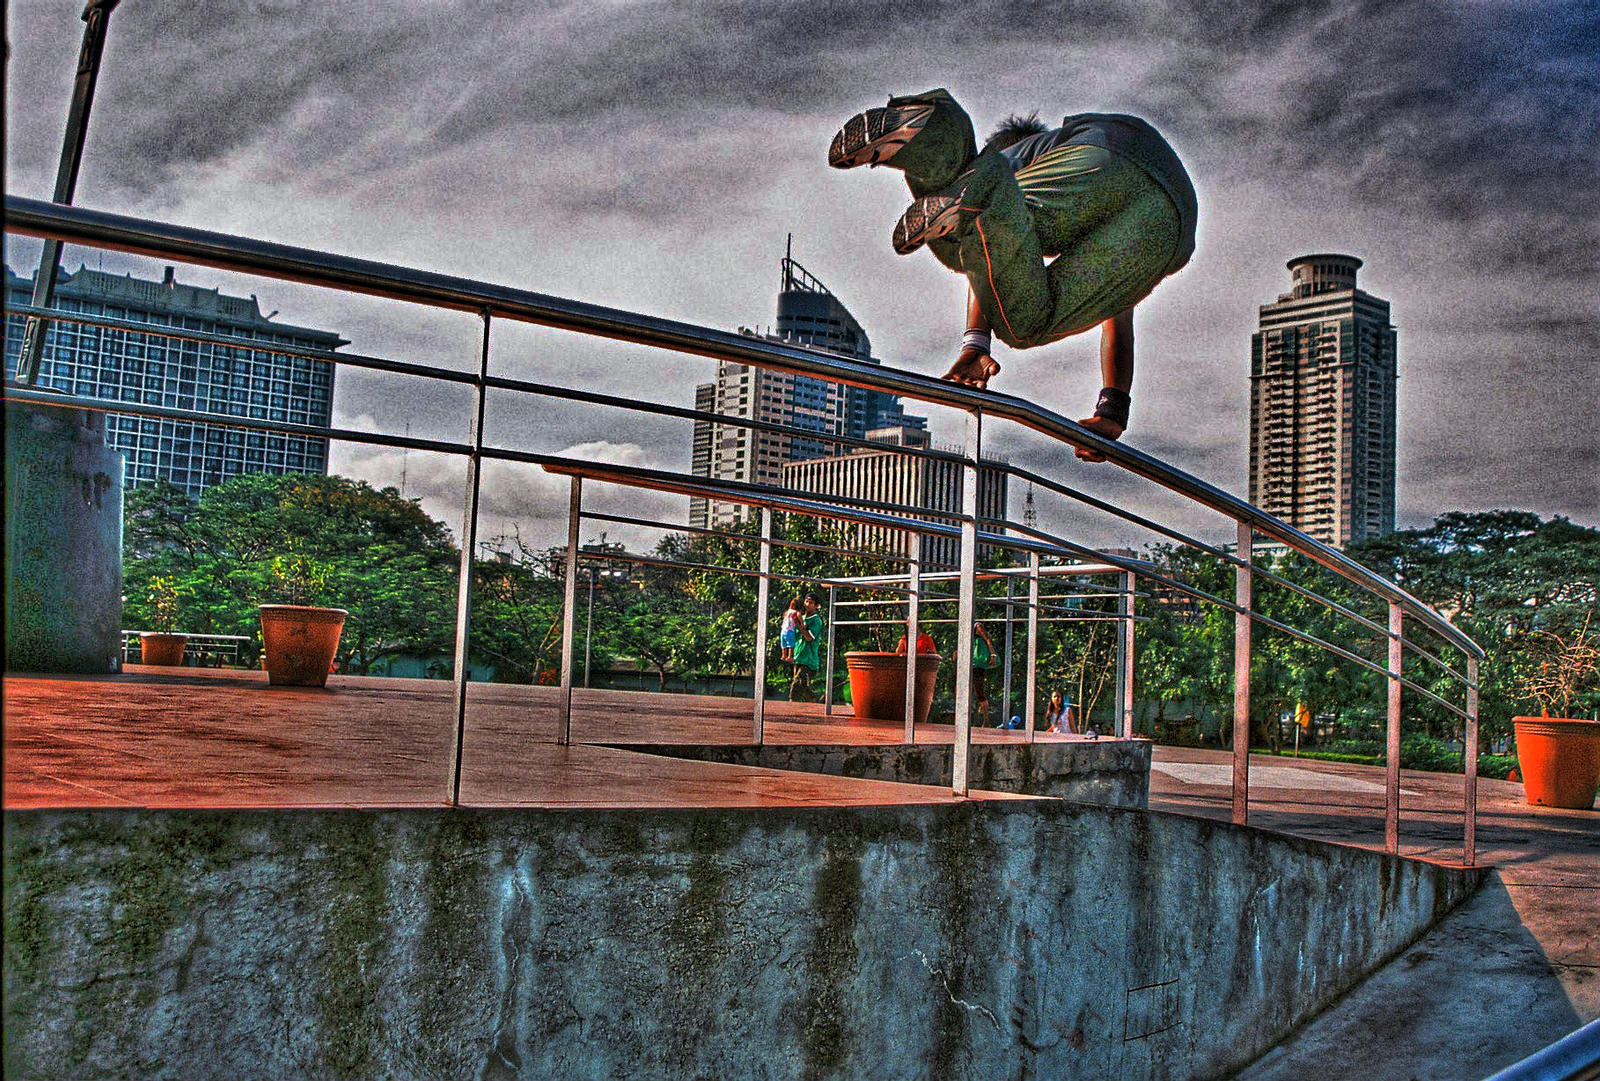 le parkour HDR by Germanow17 on DeviantArt